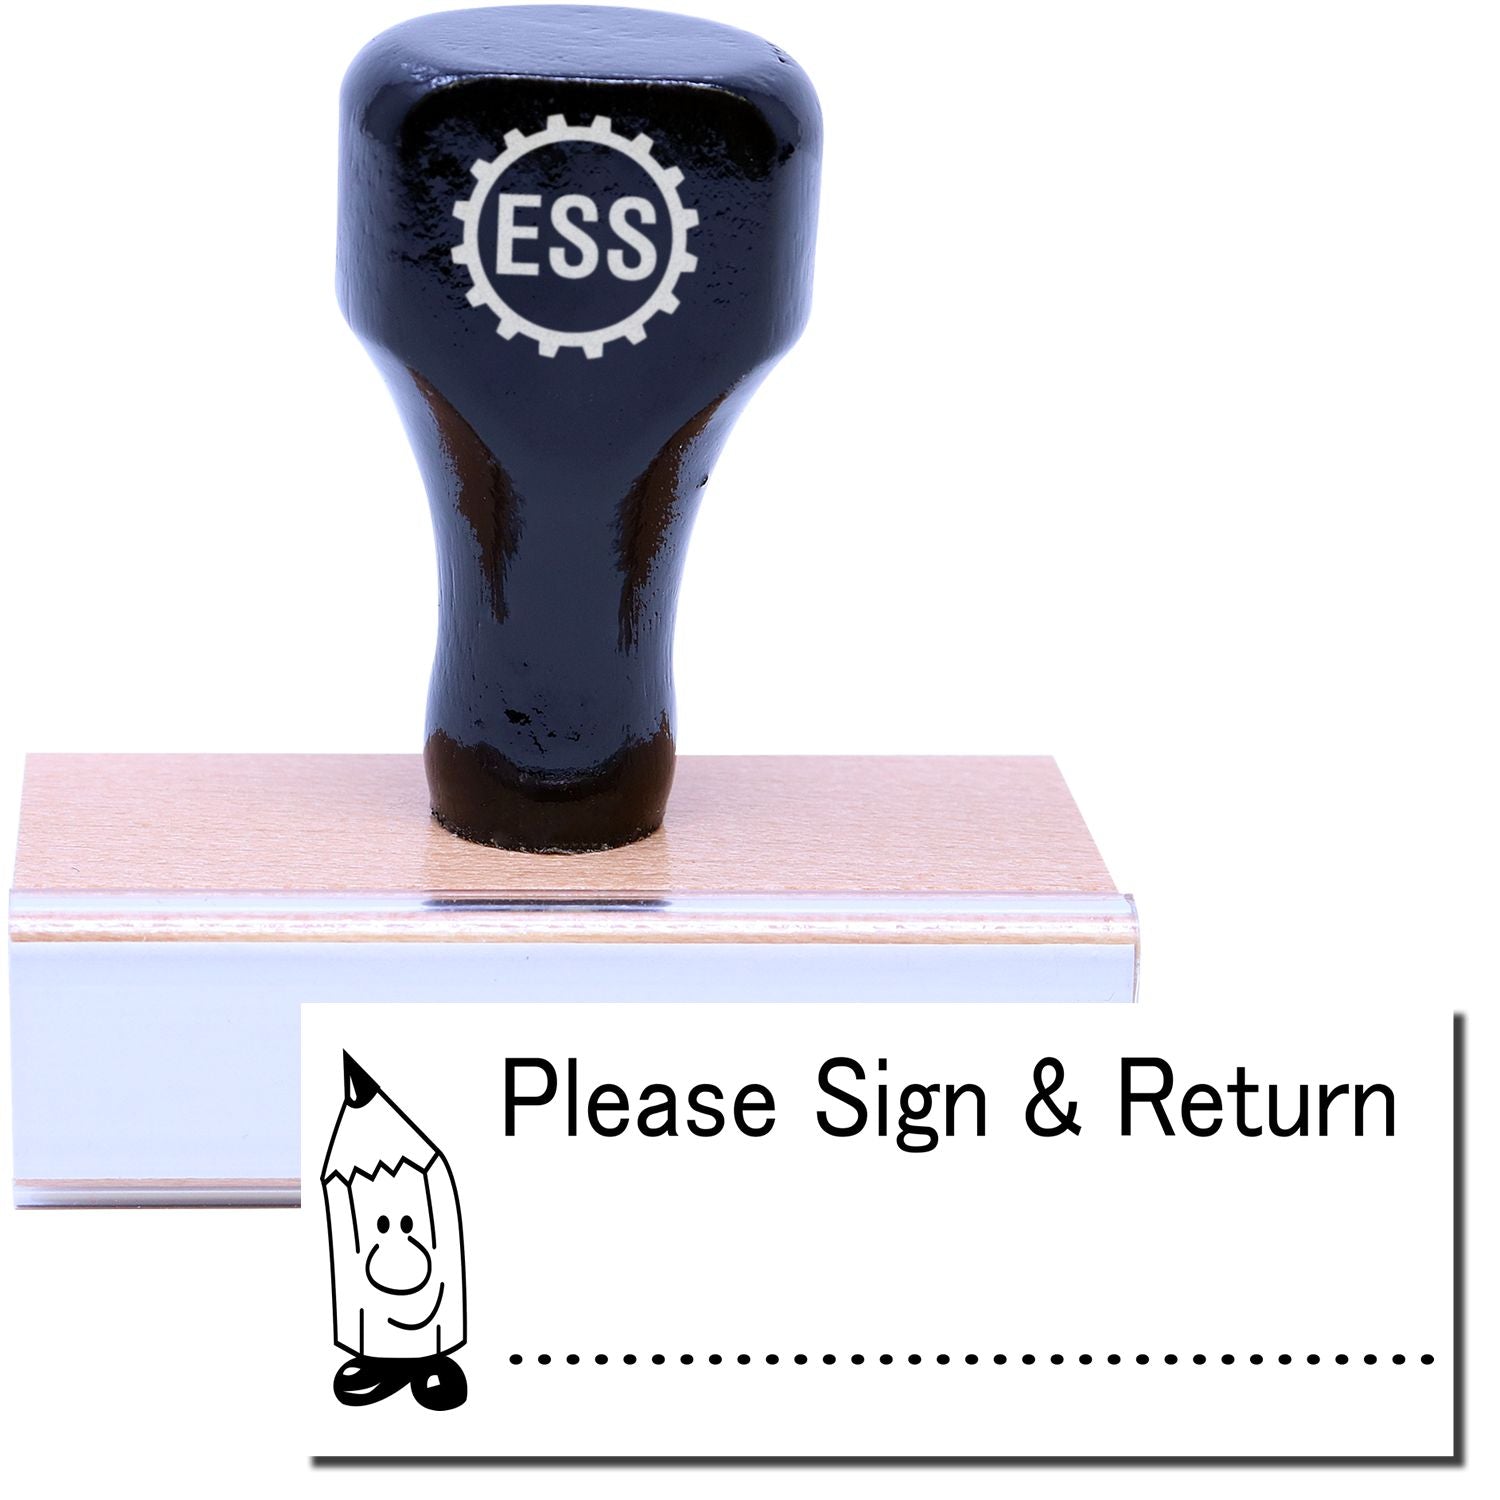 A stock office rubber stamp with a stamped image showing how the text "Please Sign & Return" in a large font with an image of a sharpened pencil and a dotted line underneath is displayed after stamping.